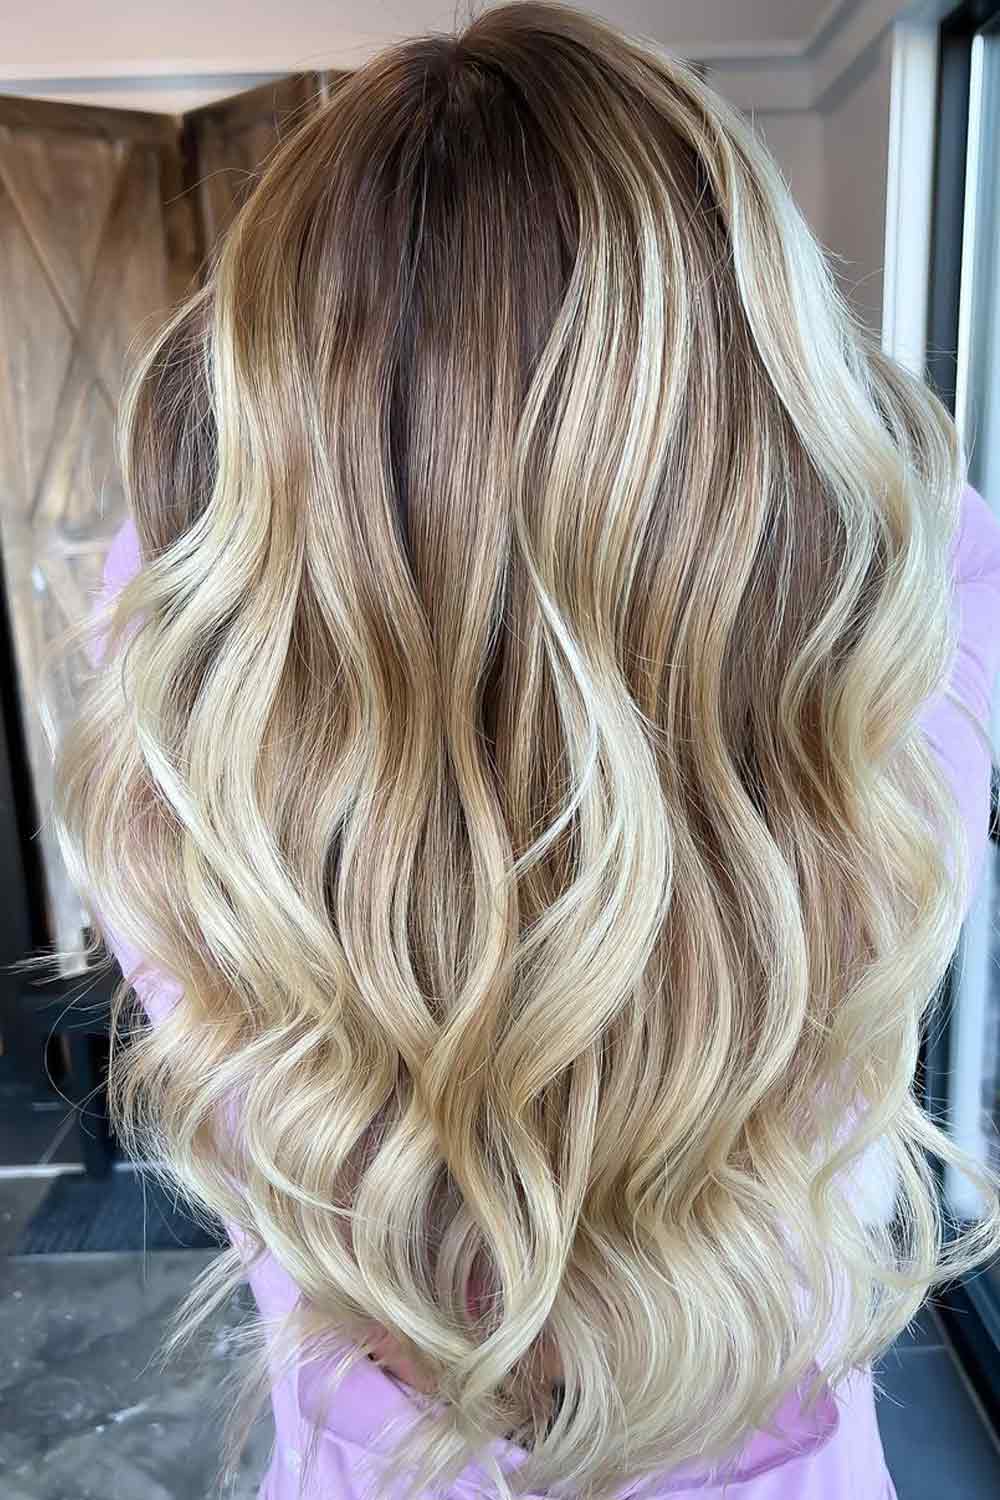 Wavy Long Brown and Blonde Hair